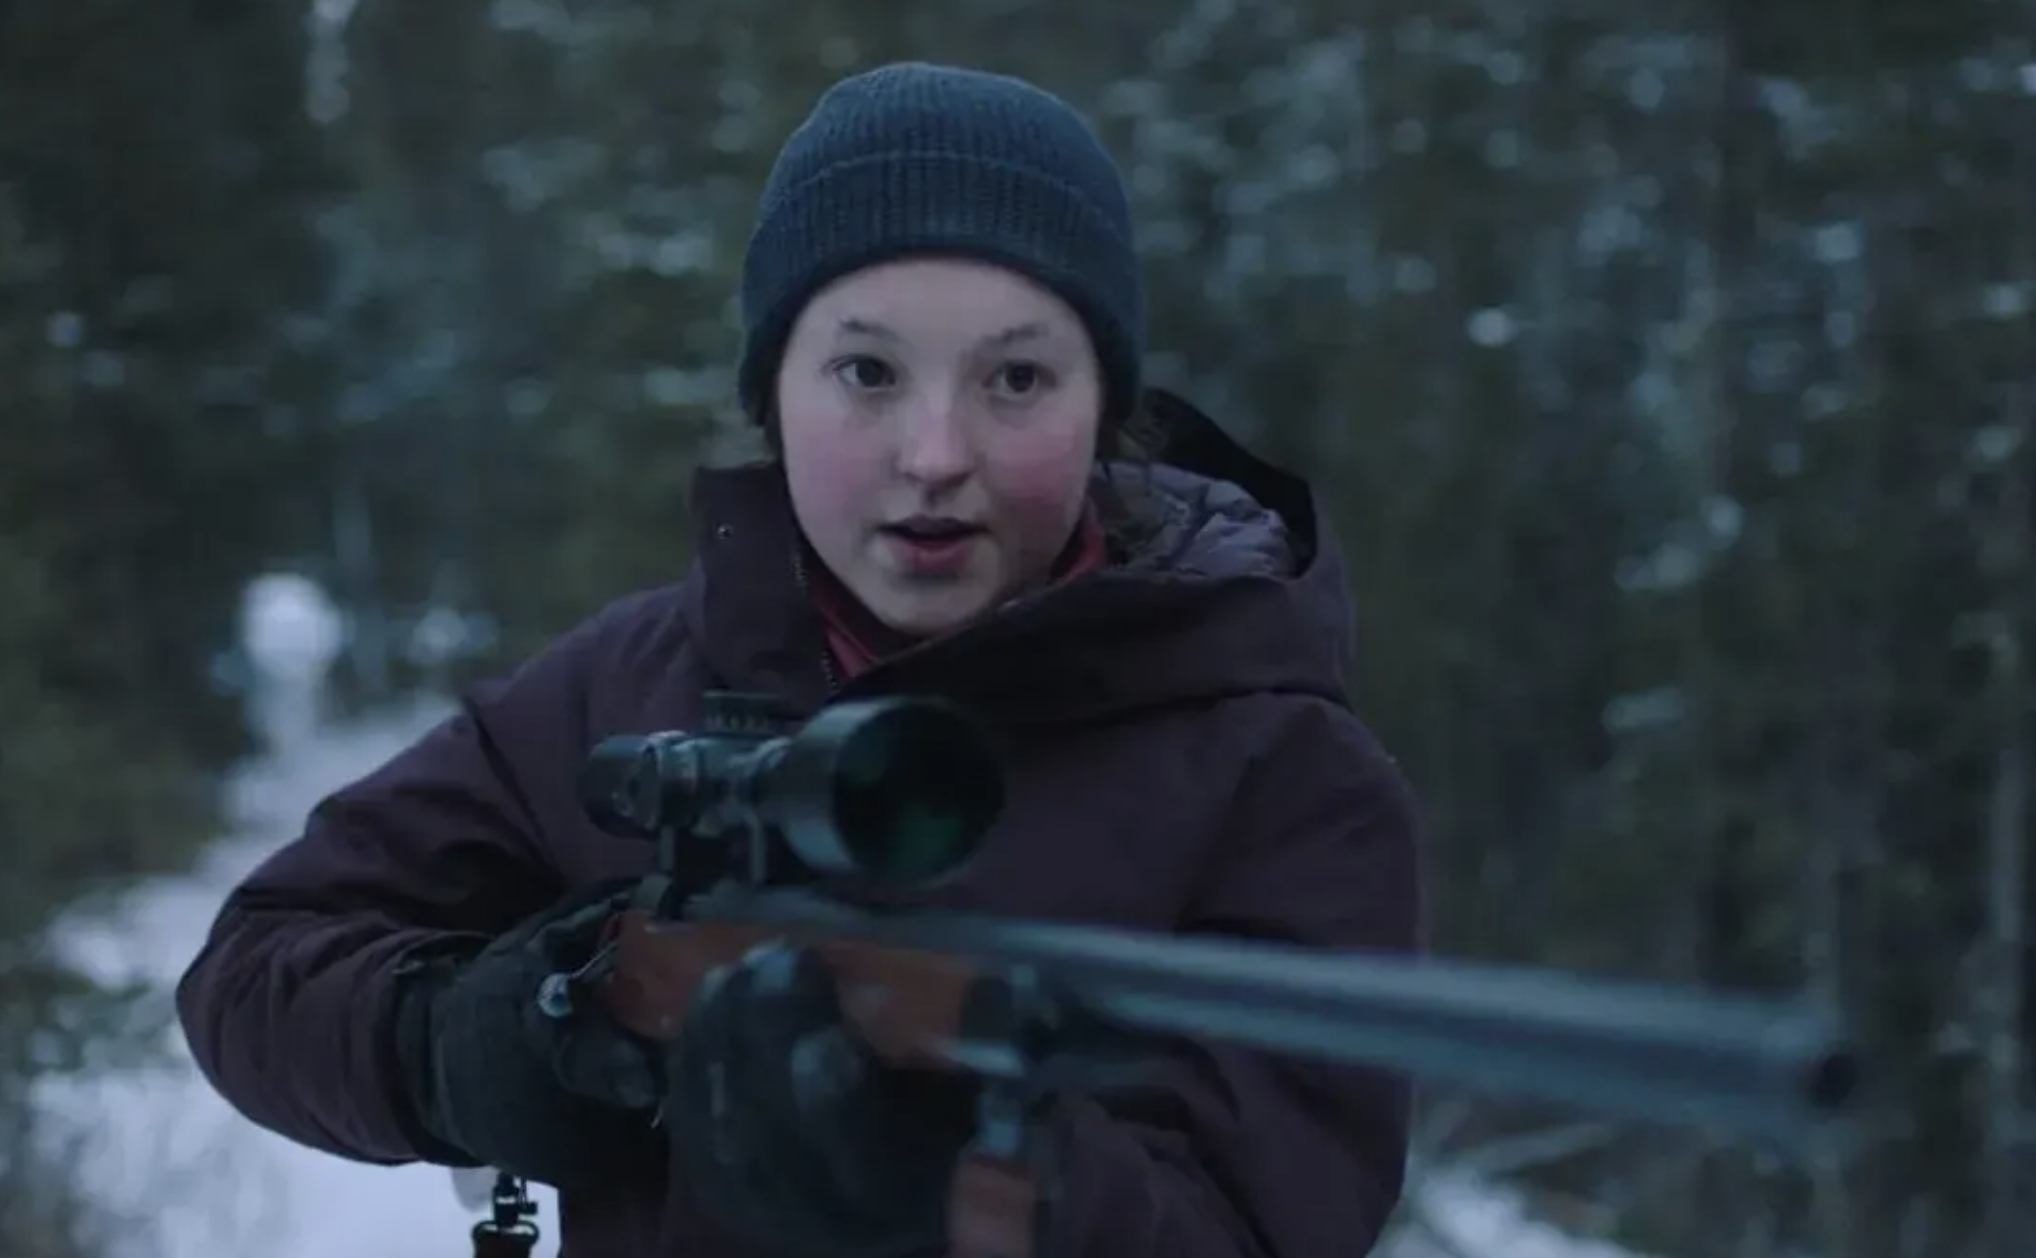 Bella as Ellie in &quot;The Last of Us,&quot; holding a gun